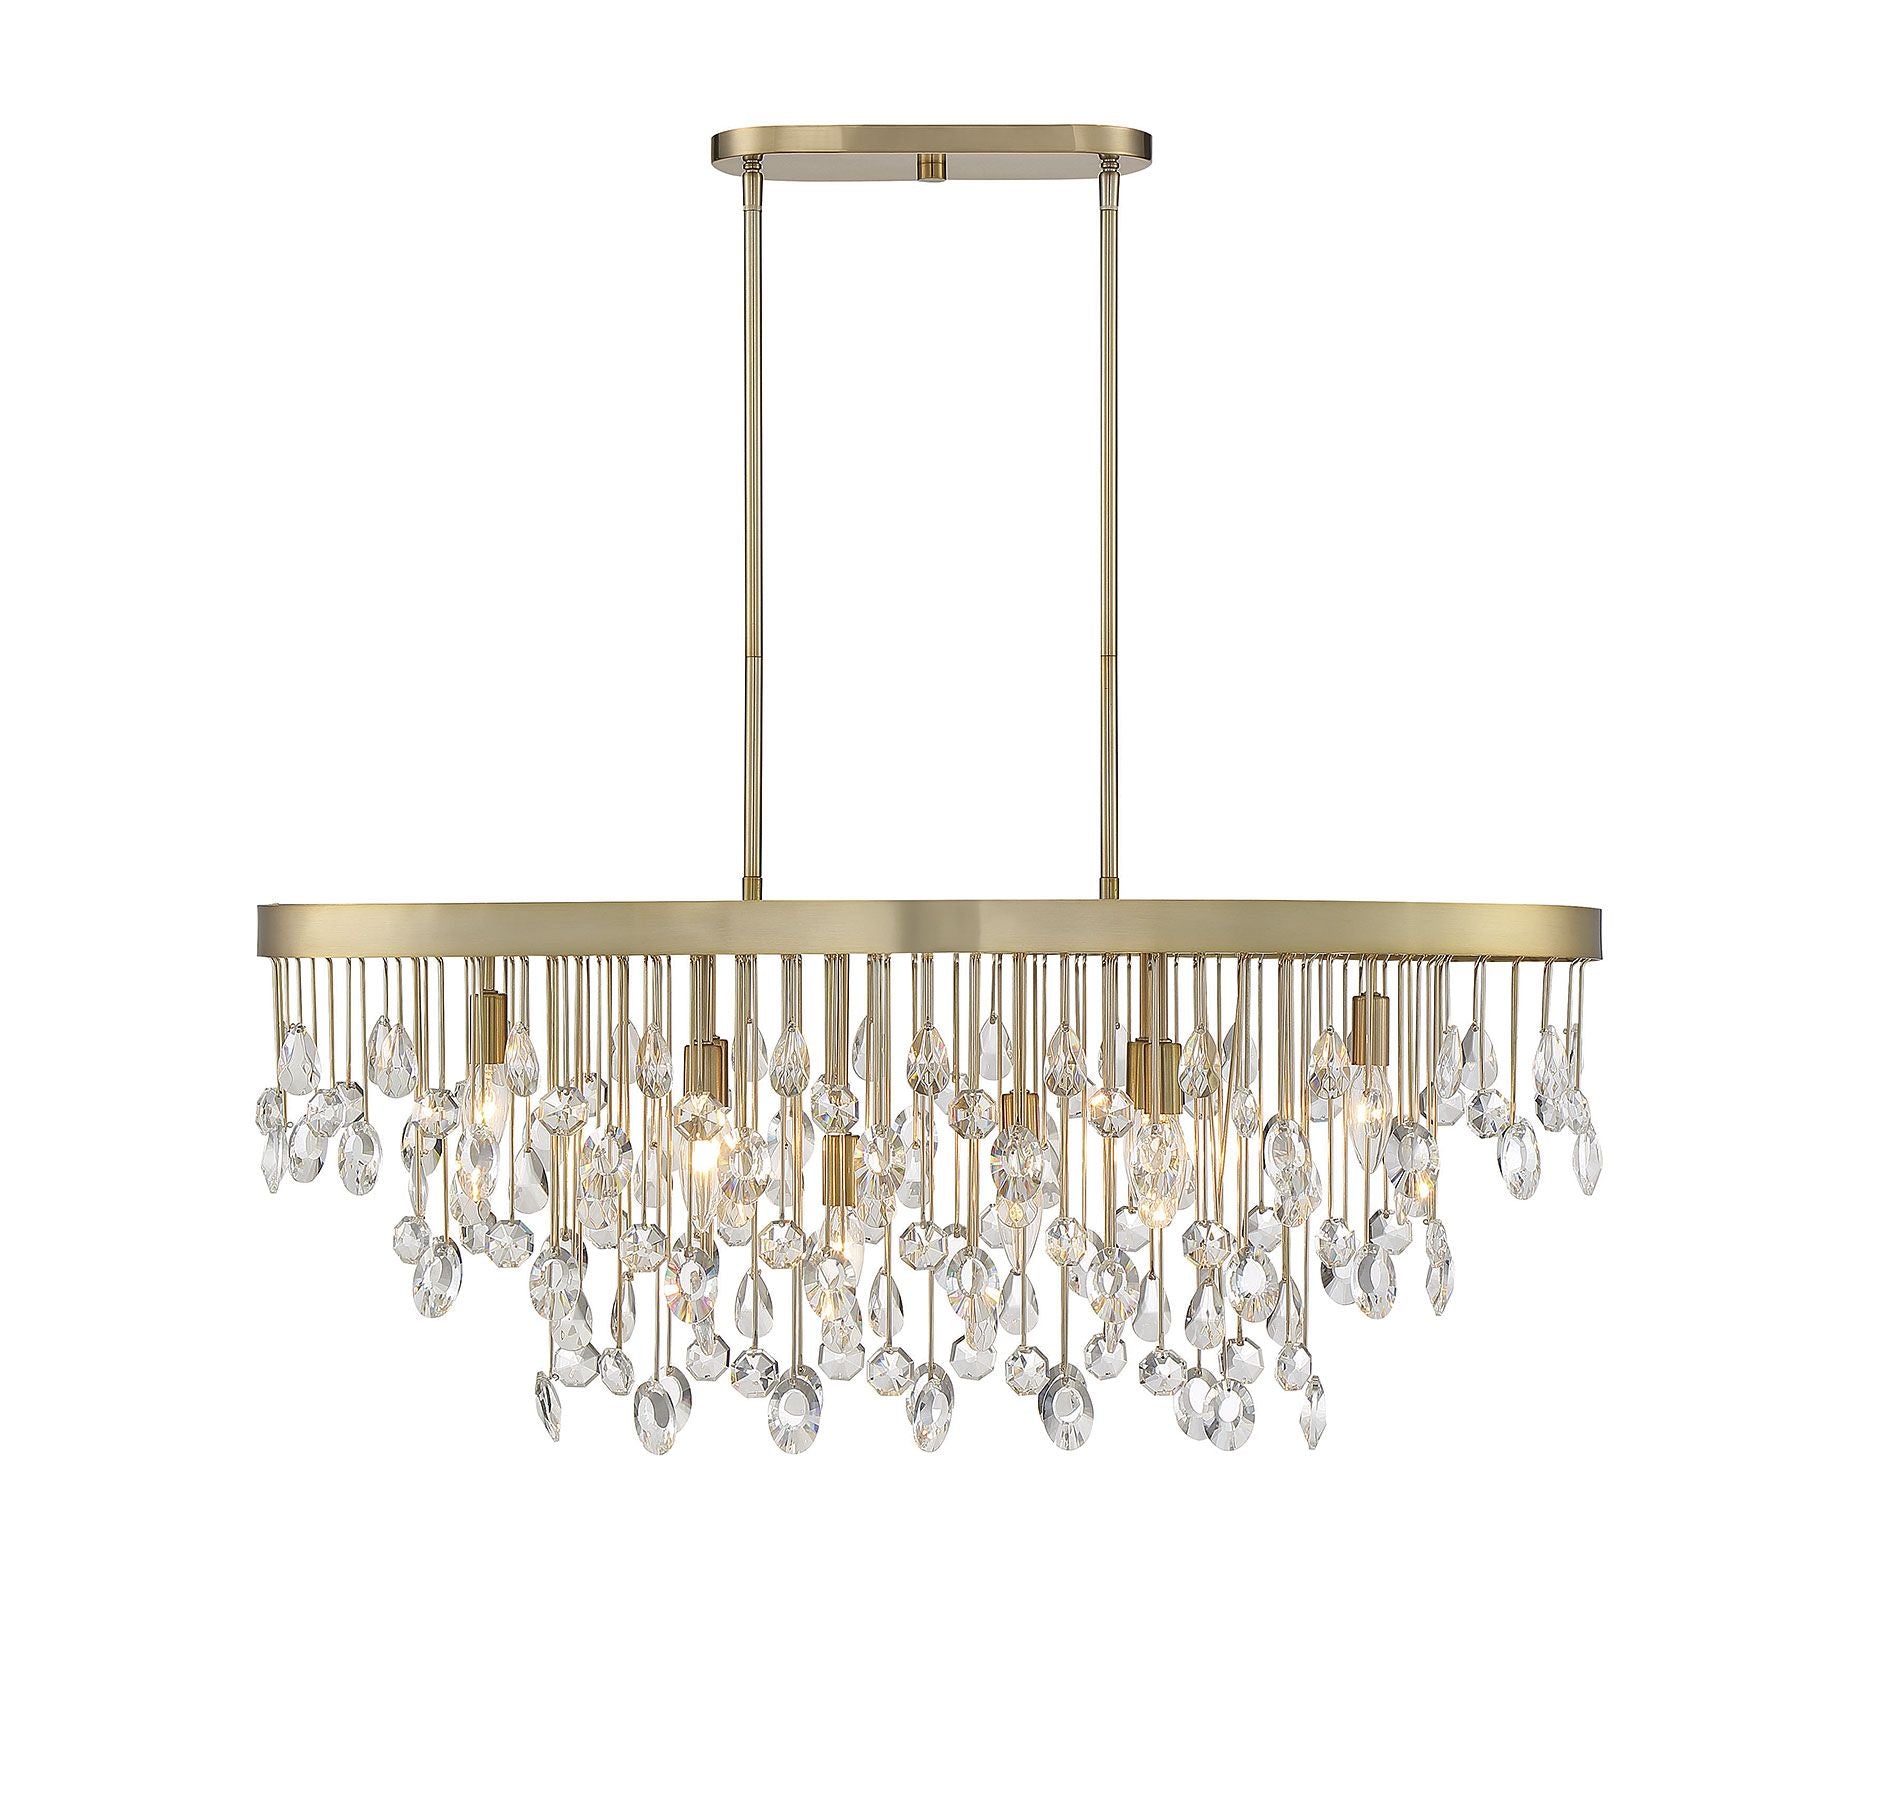 Savoy House Livorno 8-Light Linear Chandelier in Noble Brass 1-1847-8-127 Linear Suspension Light Savoy House   